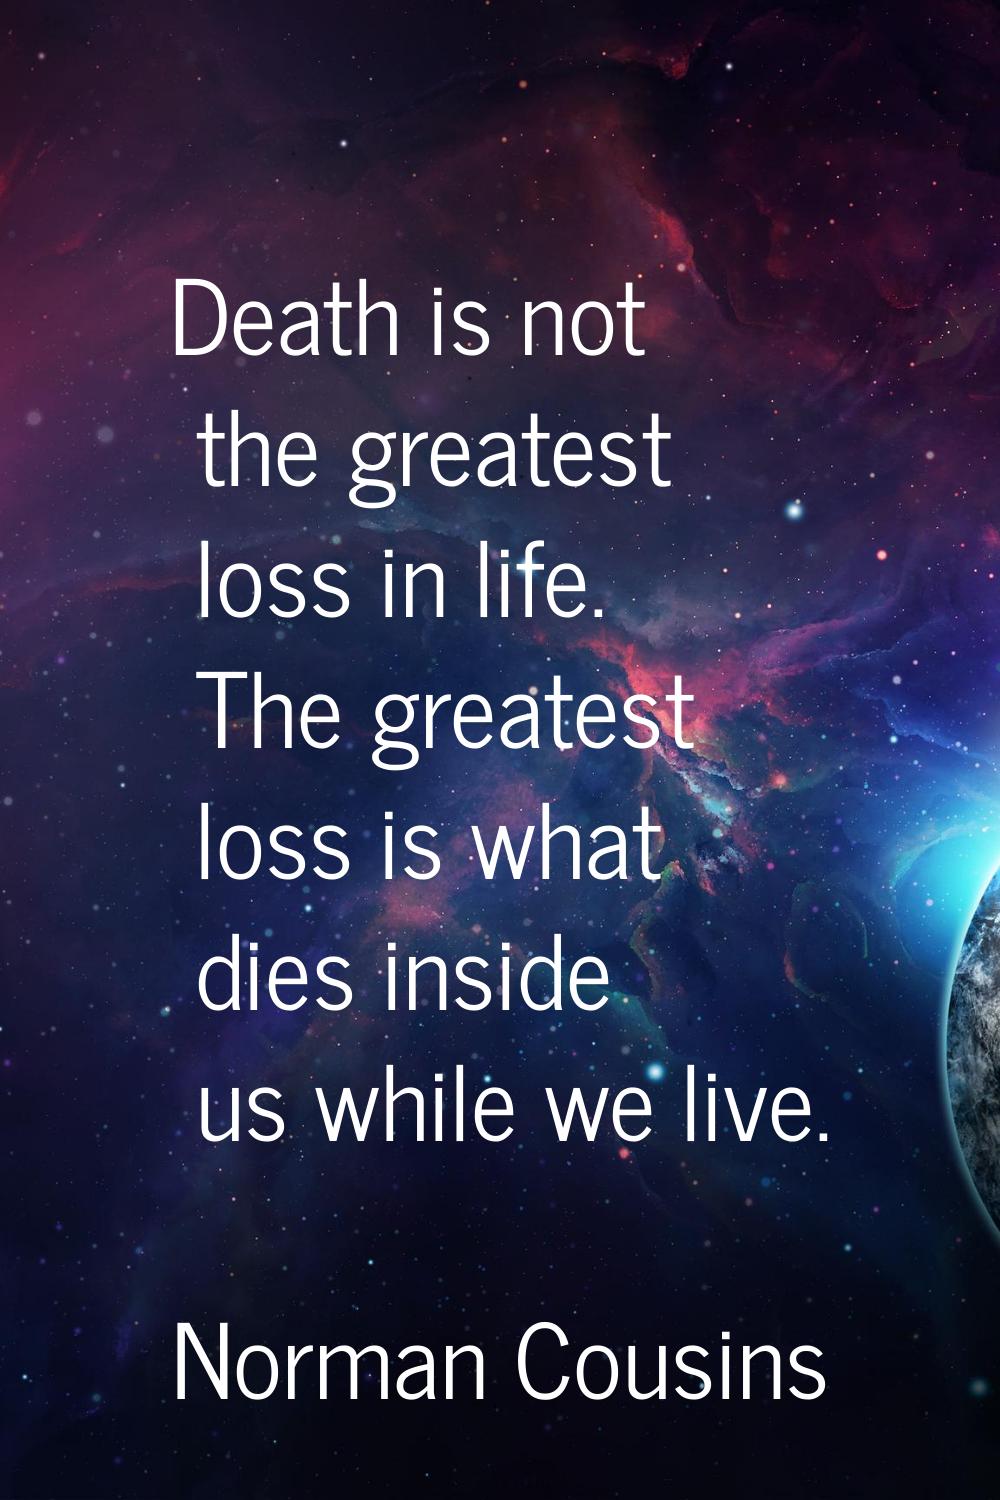 Death is not the greatest loss in life. The greatest loss is what dies inside us while we live.